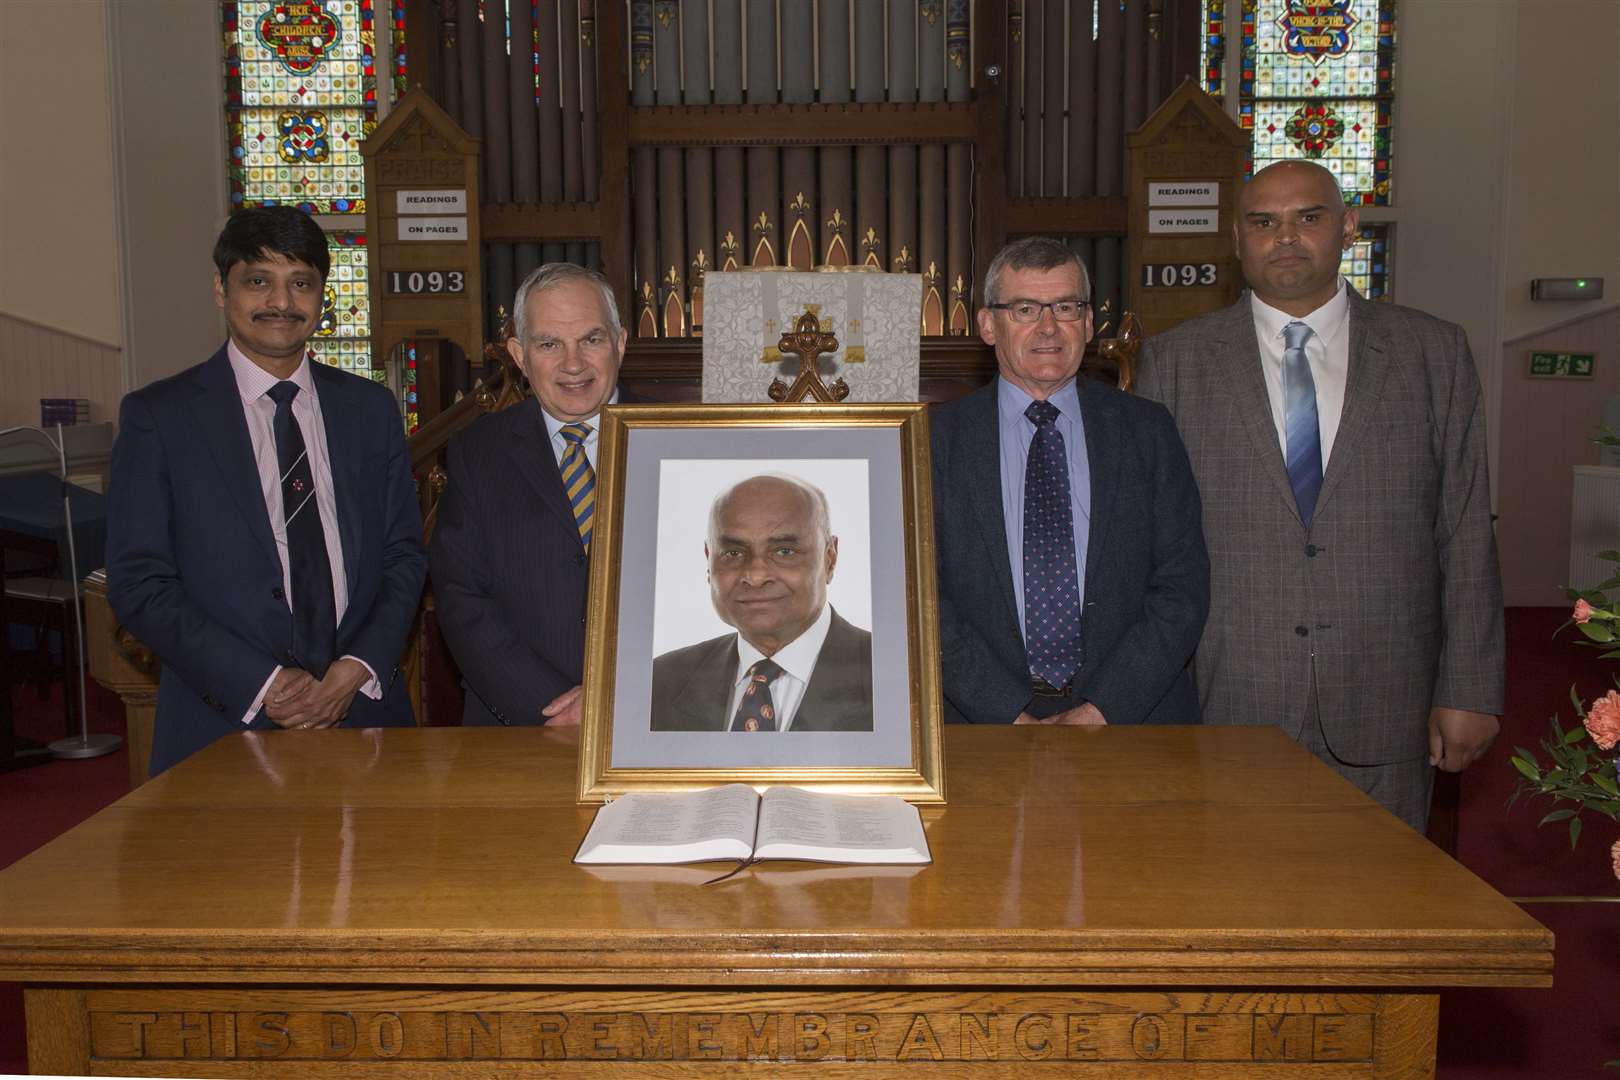 Pradip Datta's son, Dr Sandip Datta (right), with speakers (from left) Professor Rajamiyer Venkateswaran, Professor John Duncan and William Miller, a family friend who conducted the service. Picture: Robert MacDonald / Northern Studios